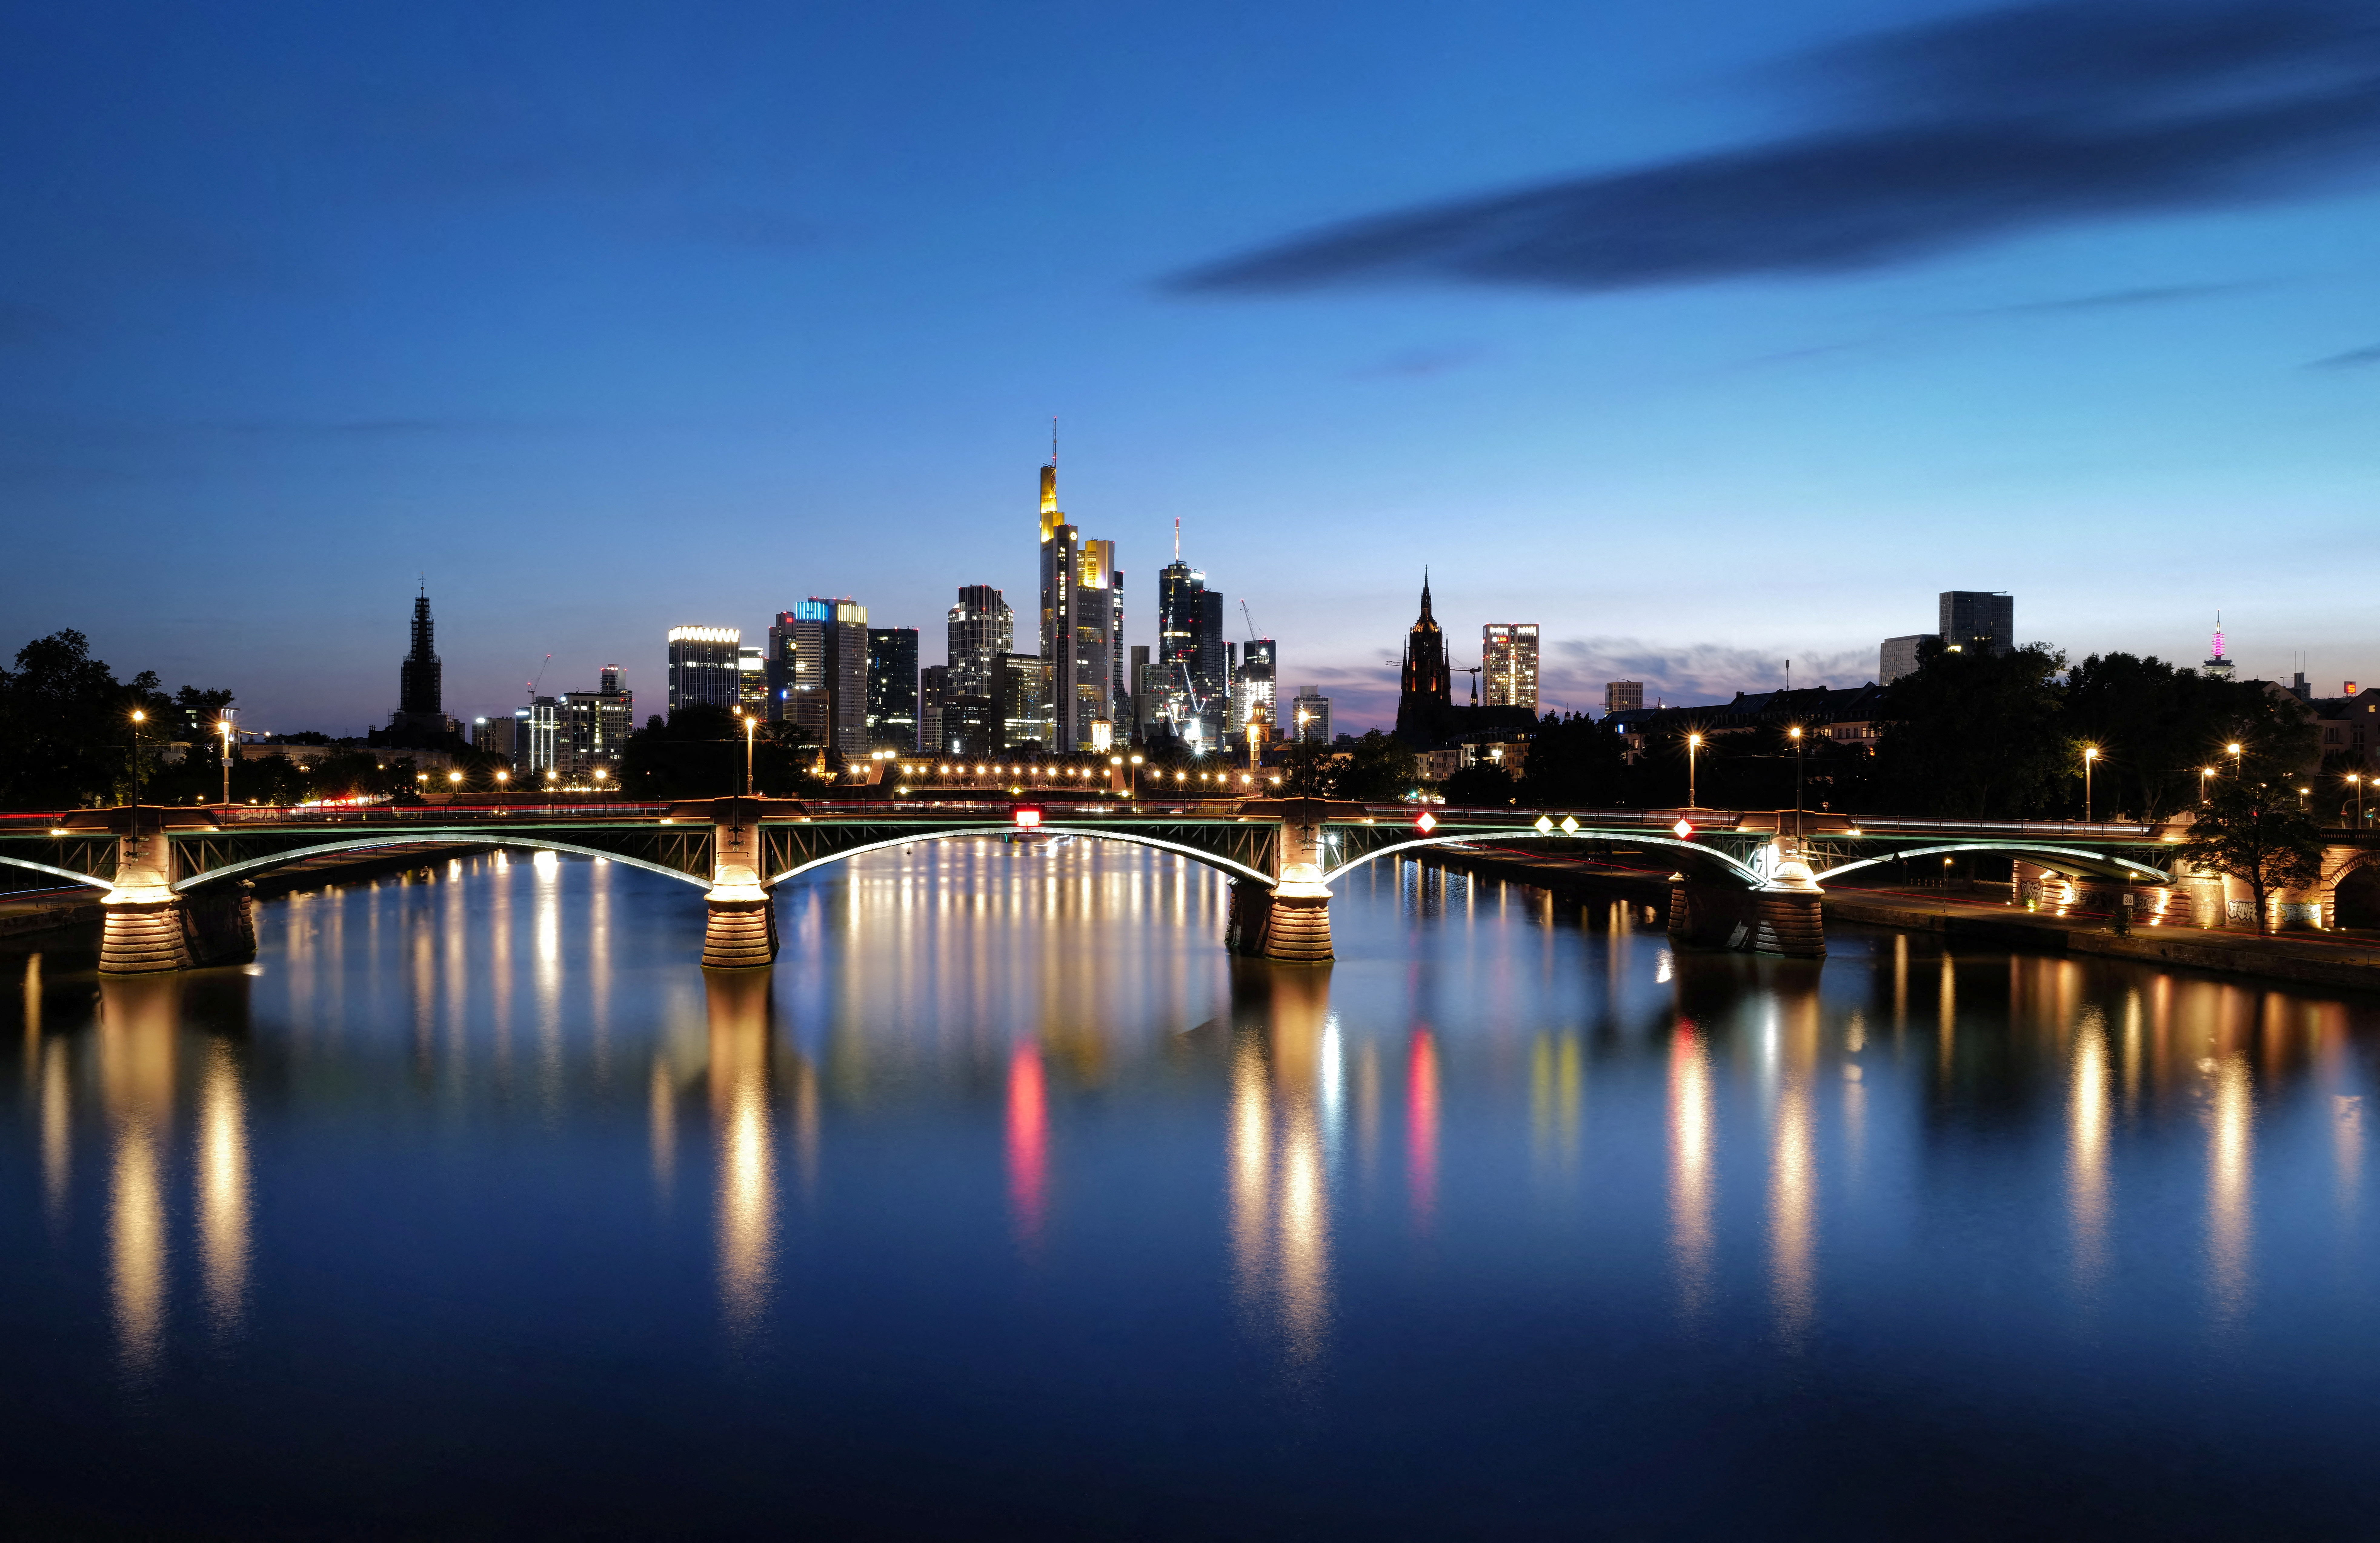 A view shows the skyline of Frankfurt